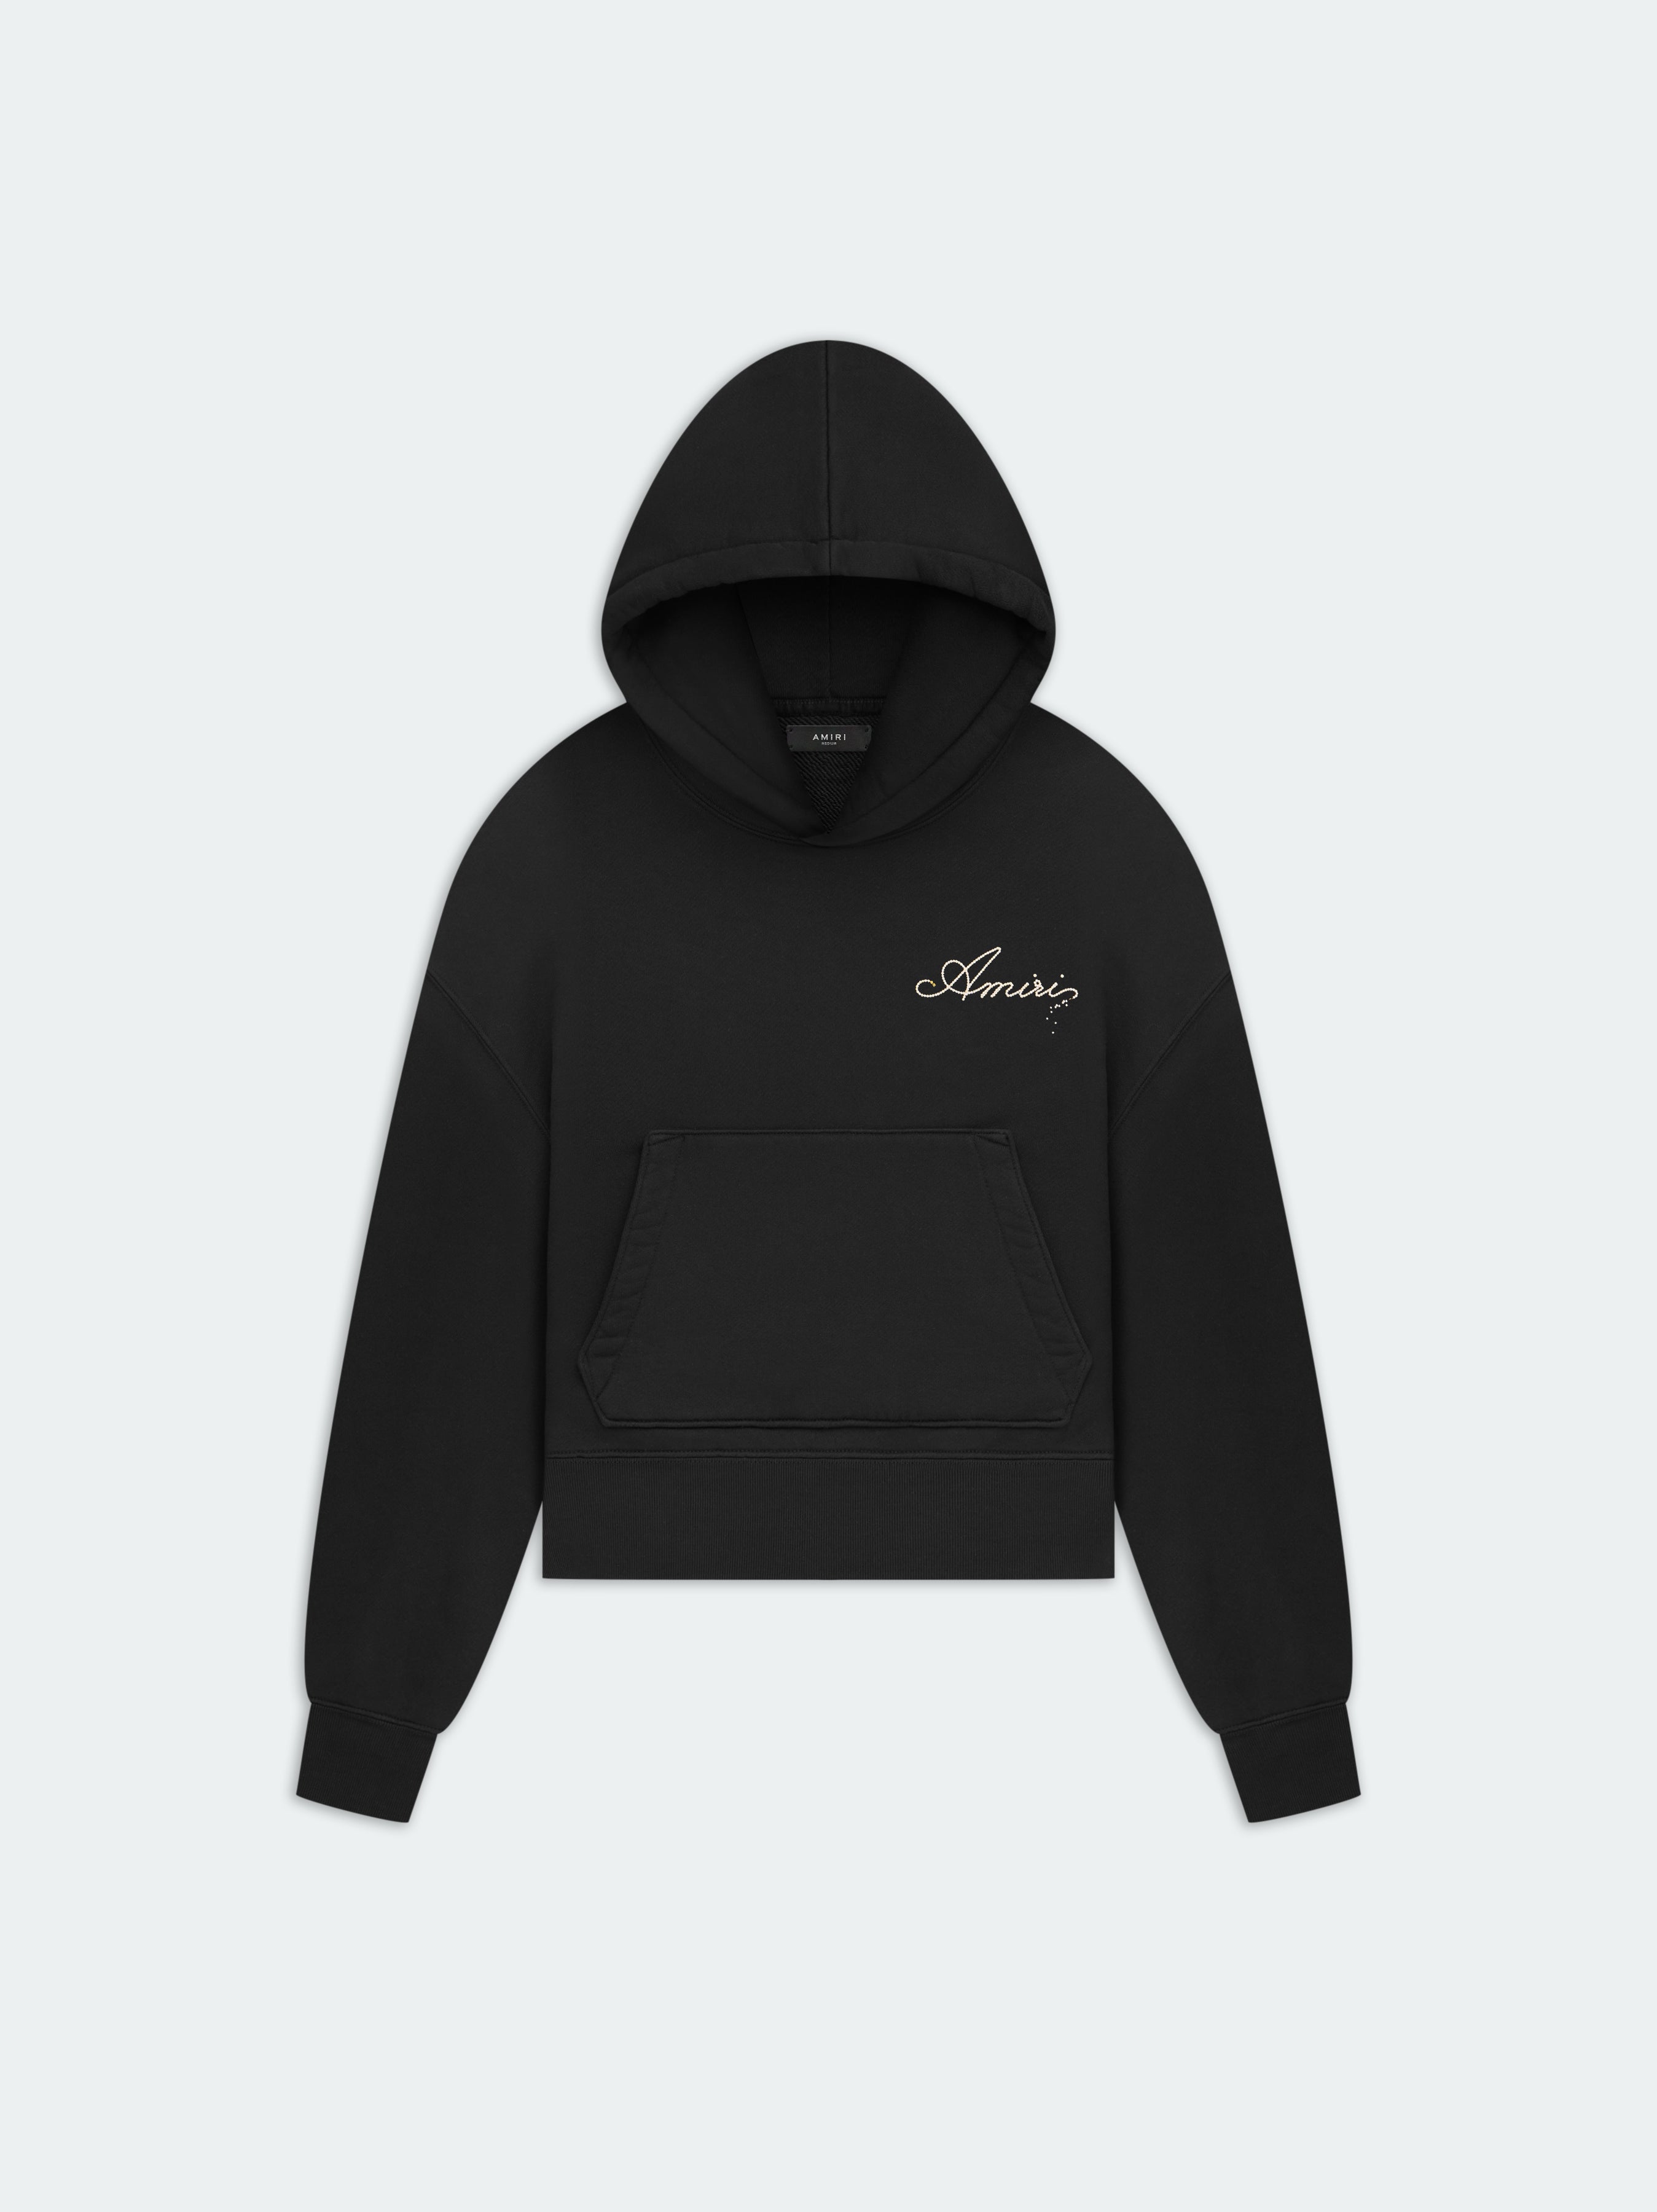 Product WOMEN - CHAMPAGNE HOODIE - Black featured image